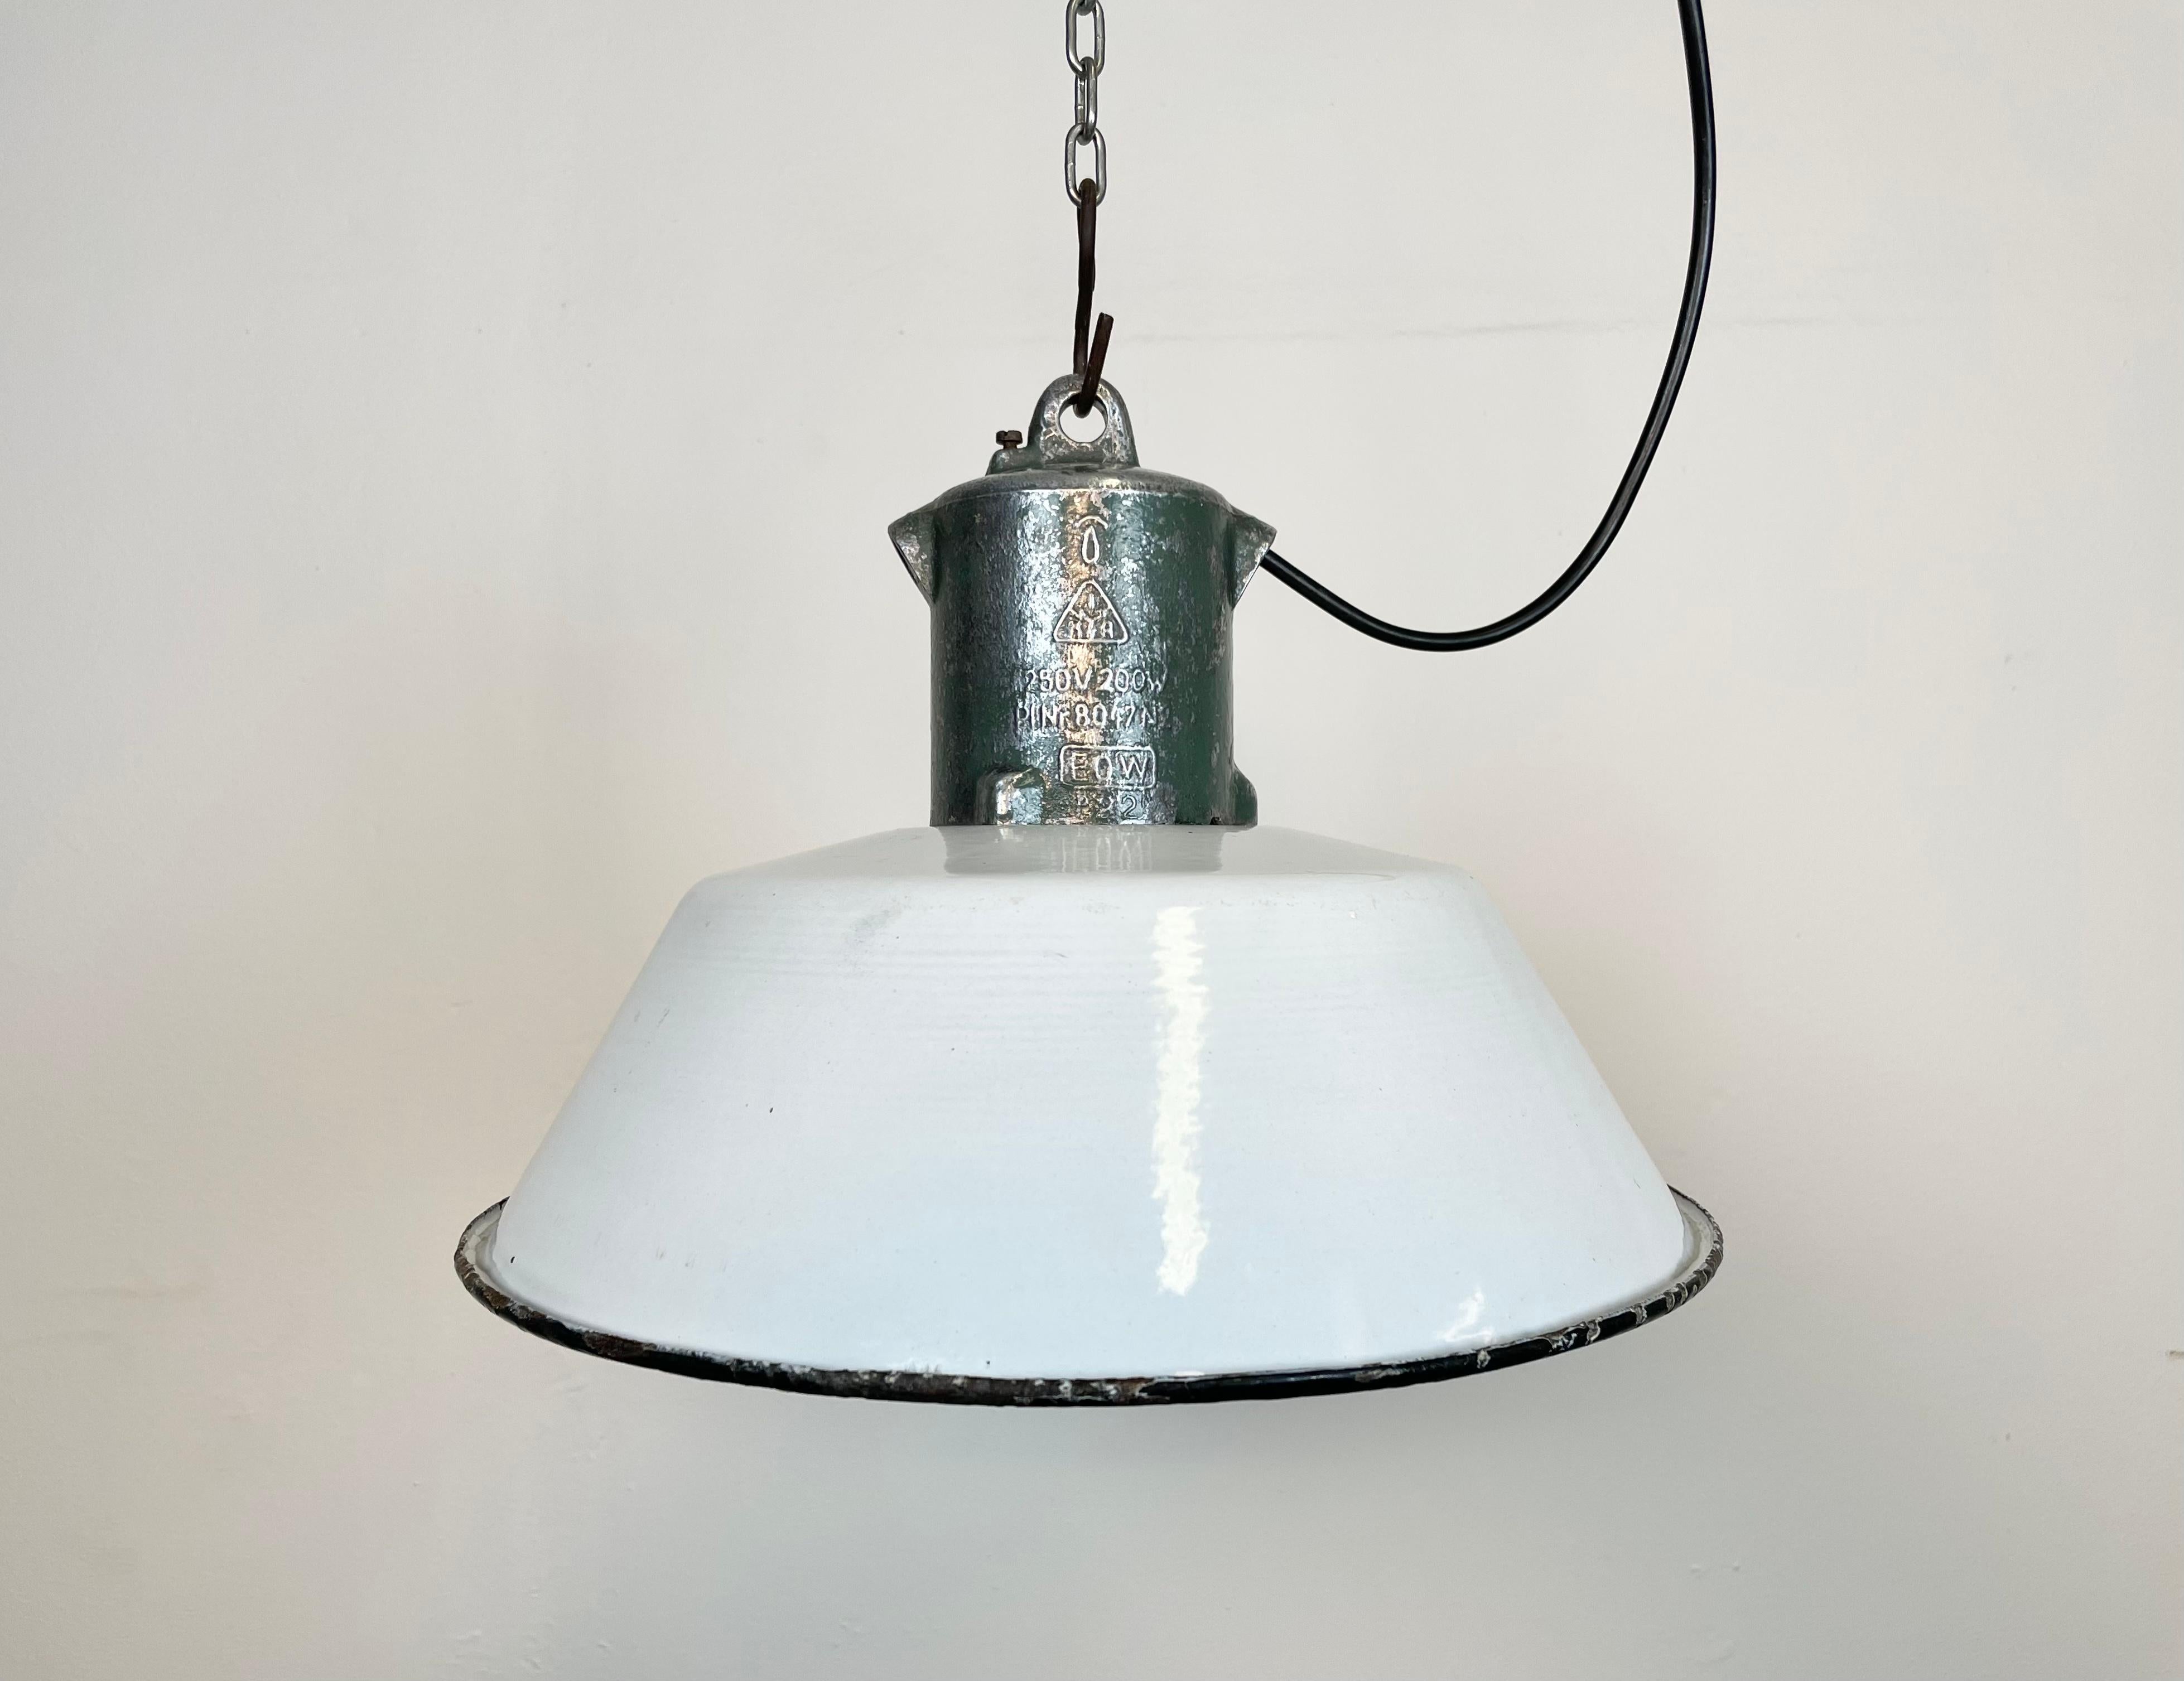 Industrial white enamel pendant light made by EOW in former East Germany during the 1950s. White enamel inside the shade. Cast aluminium top. The original porcelain socket requires E 27/ E 26 light bulbs. New wire. Fully functional. The weight of